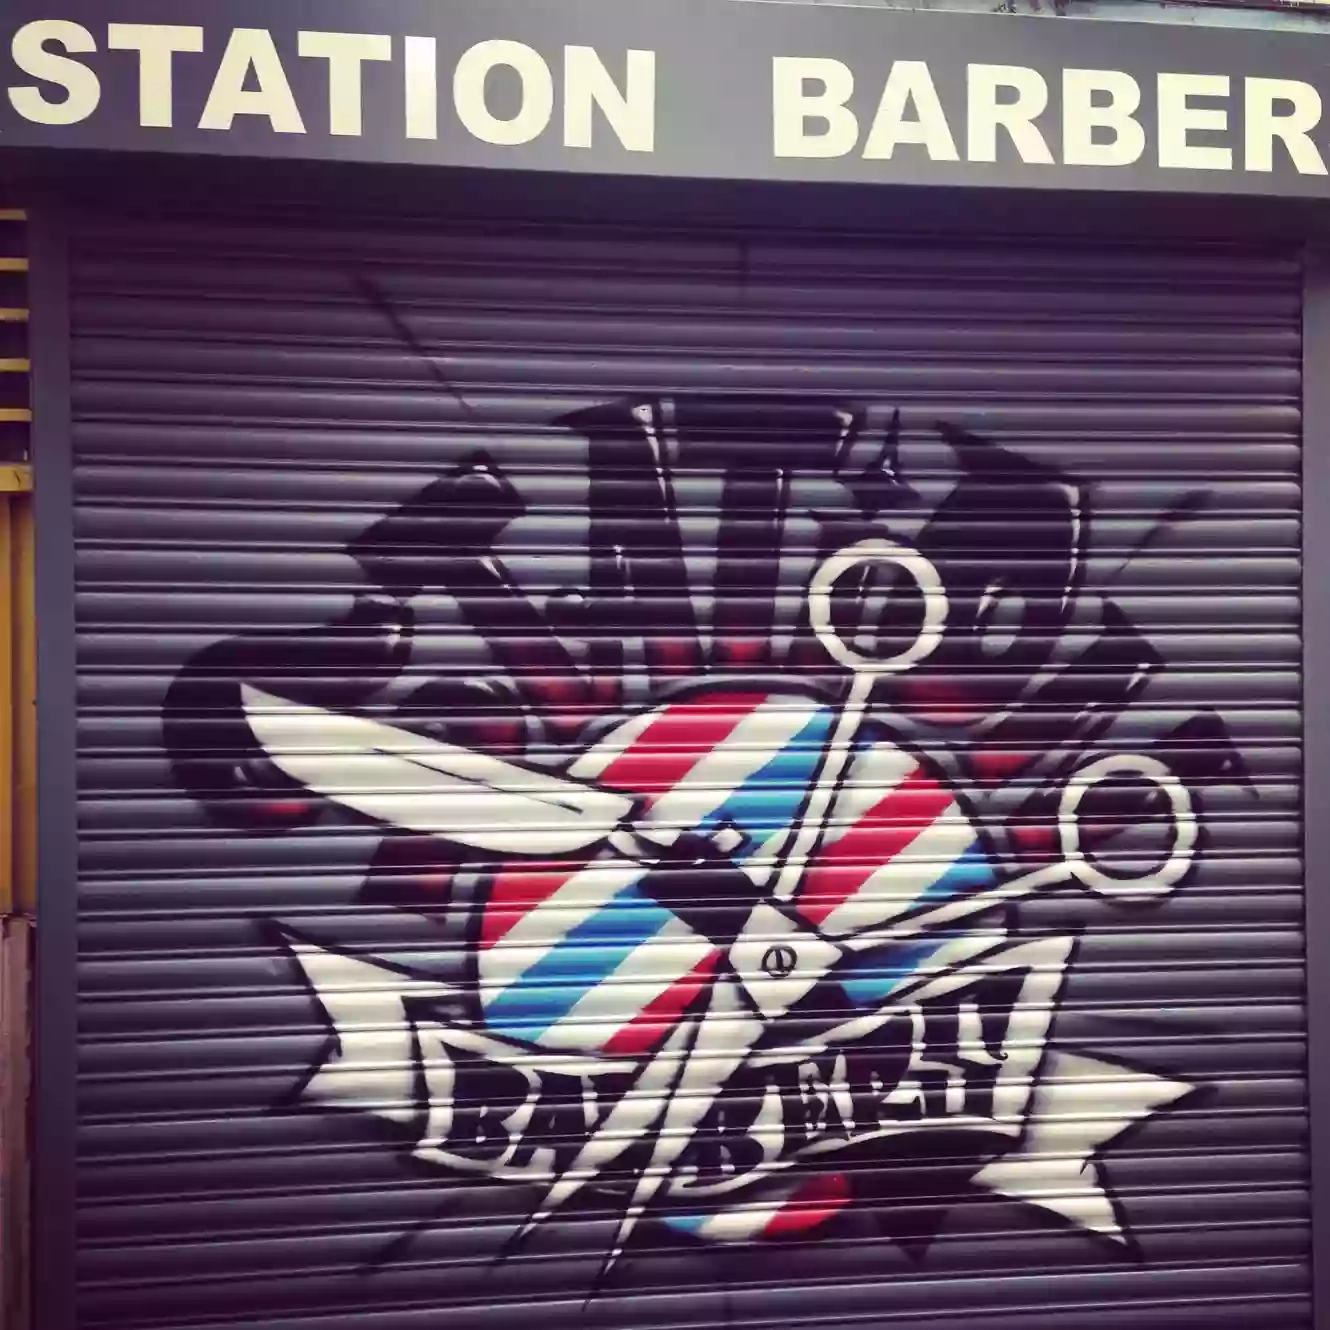 Station barbers